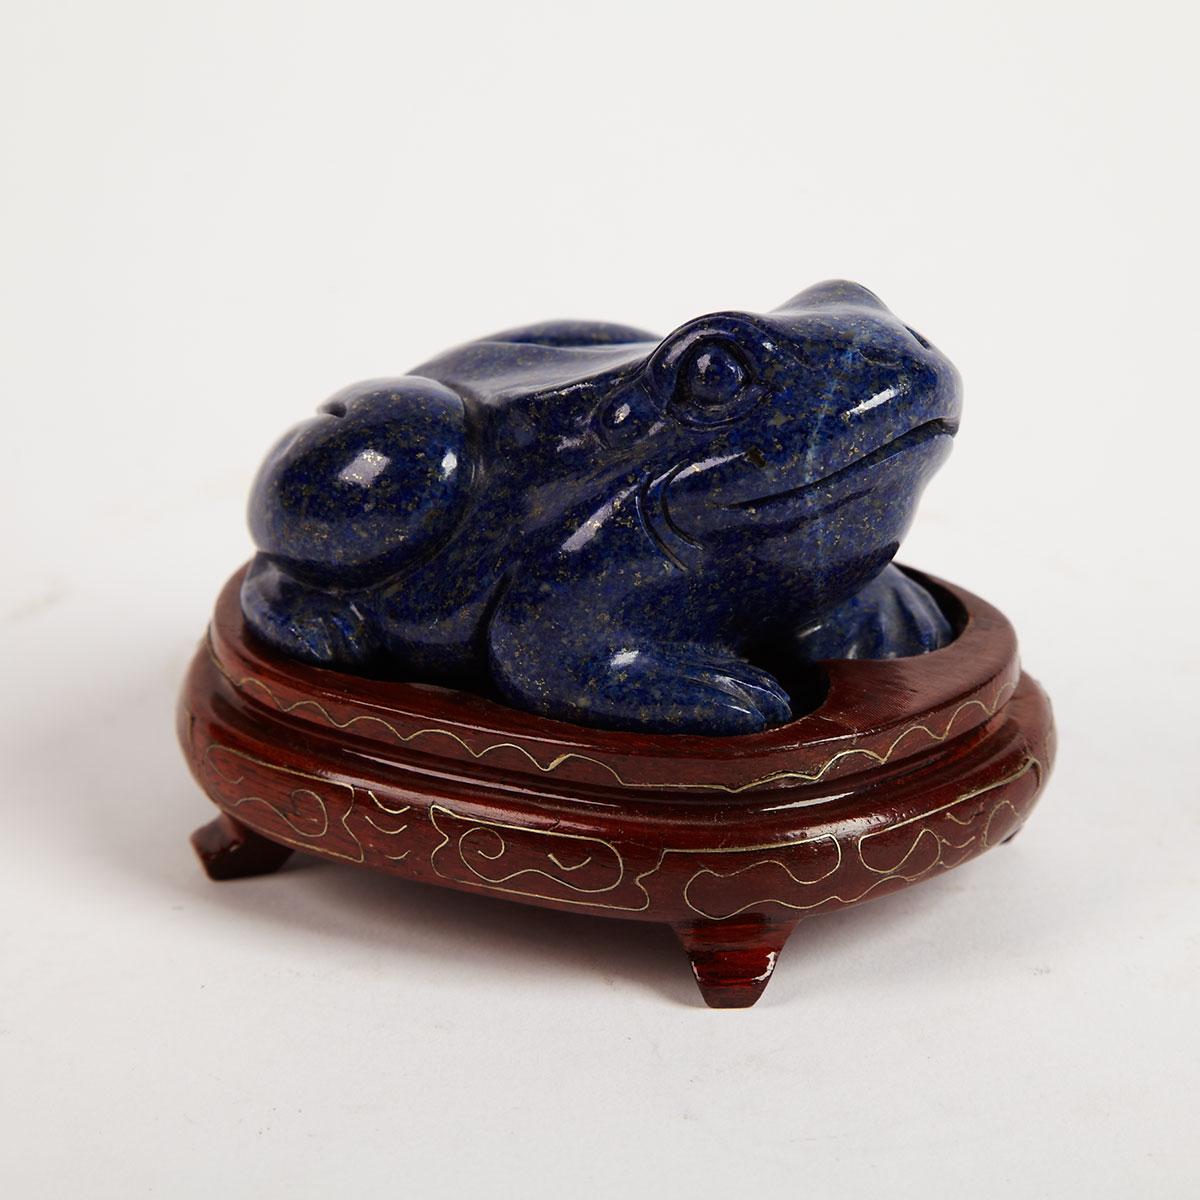 Lapis Lazuli Carved Toad